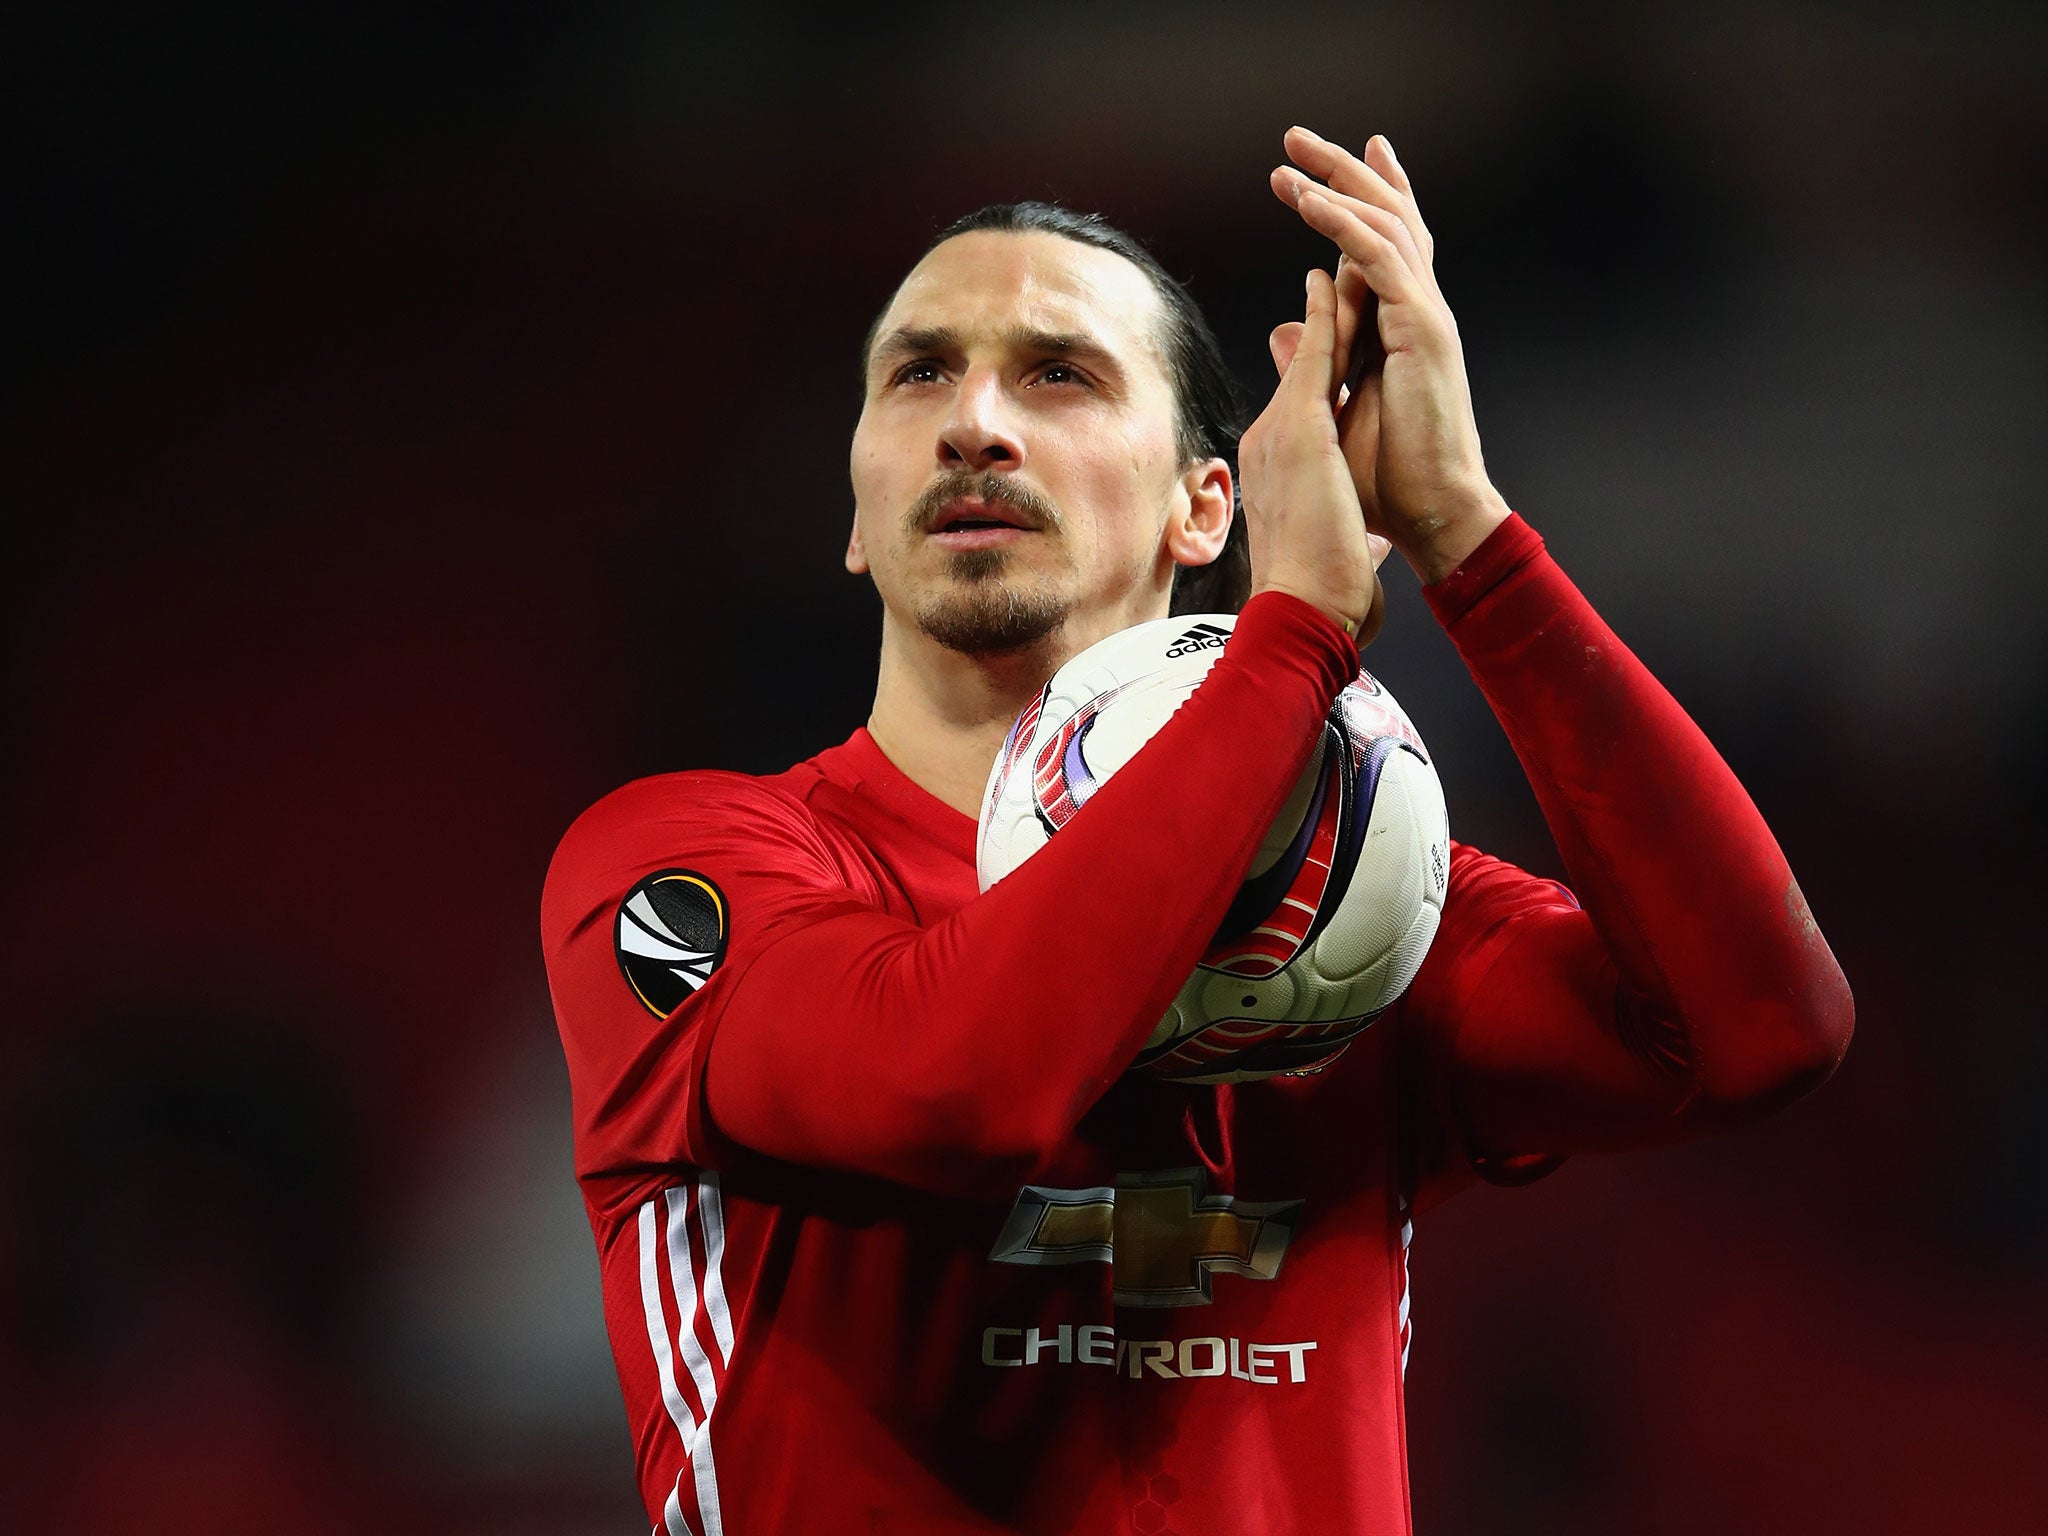 Ibrahimovic has scored 23 goals in all competitions so far this season